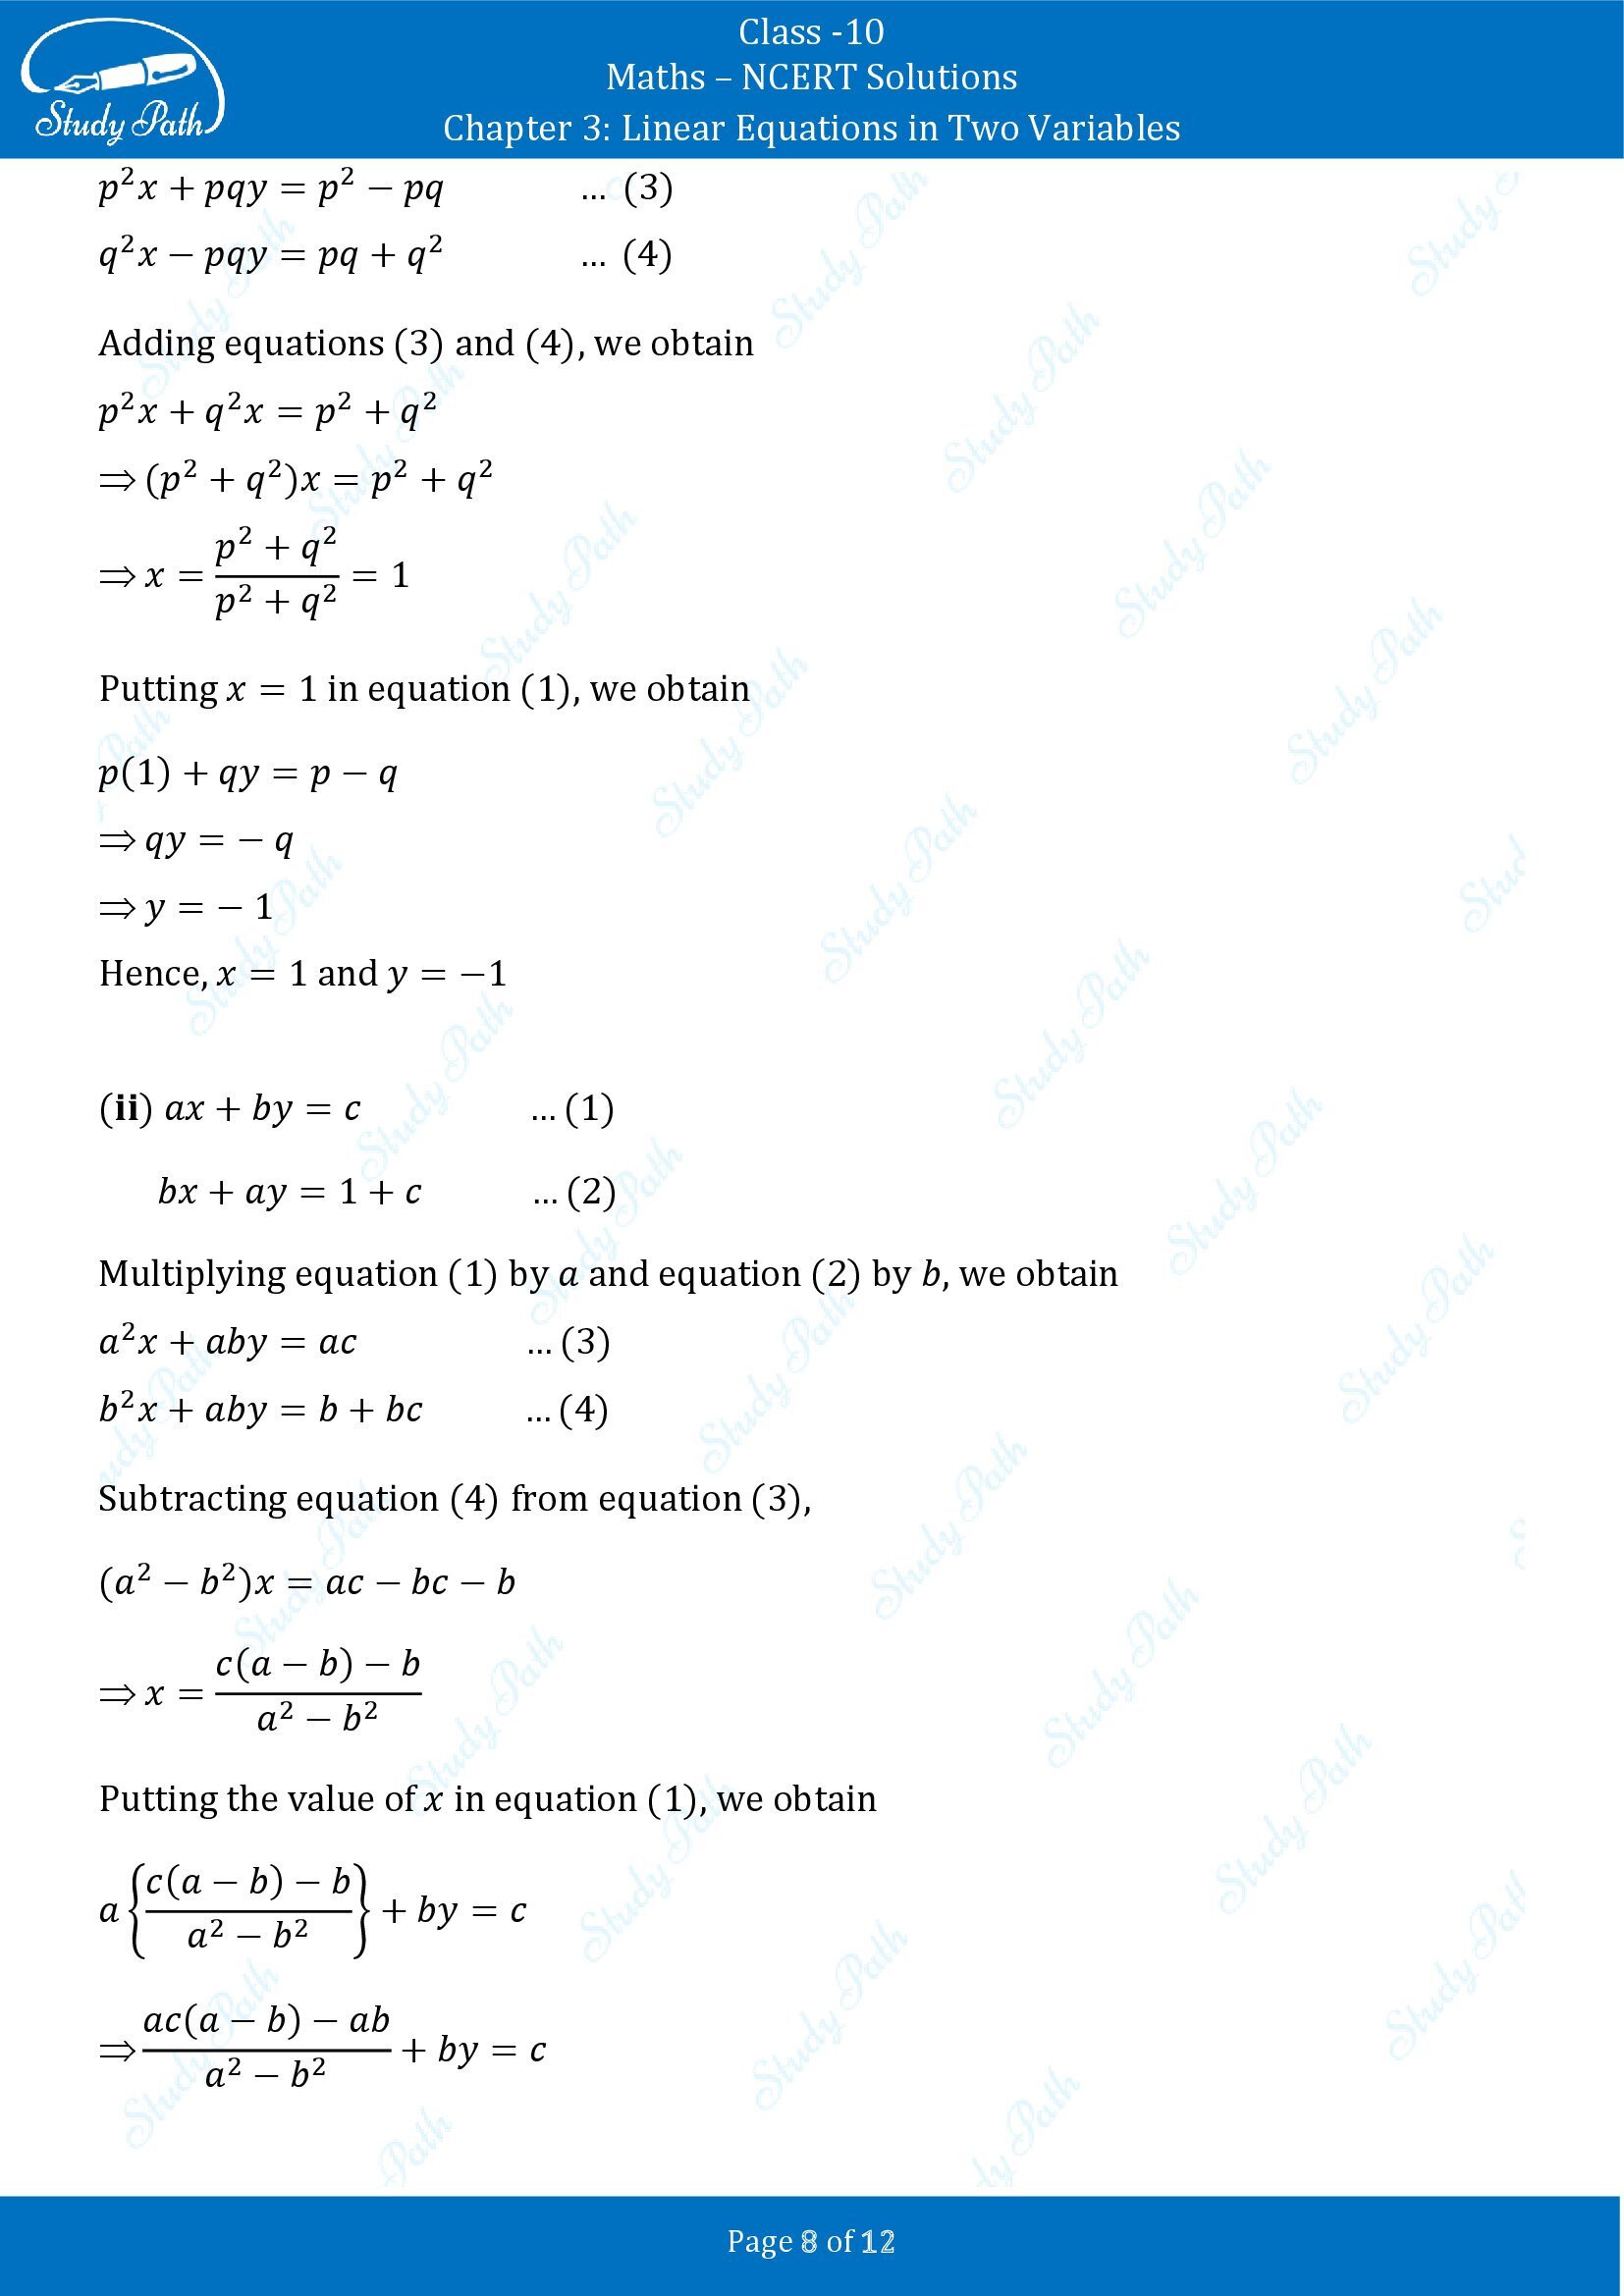 NCERT Solutions for Class 10 Maths Chapter 3 Linear Equations in Two Variables Exercise 3.7 00008